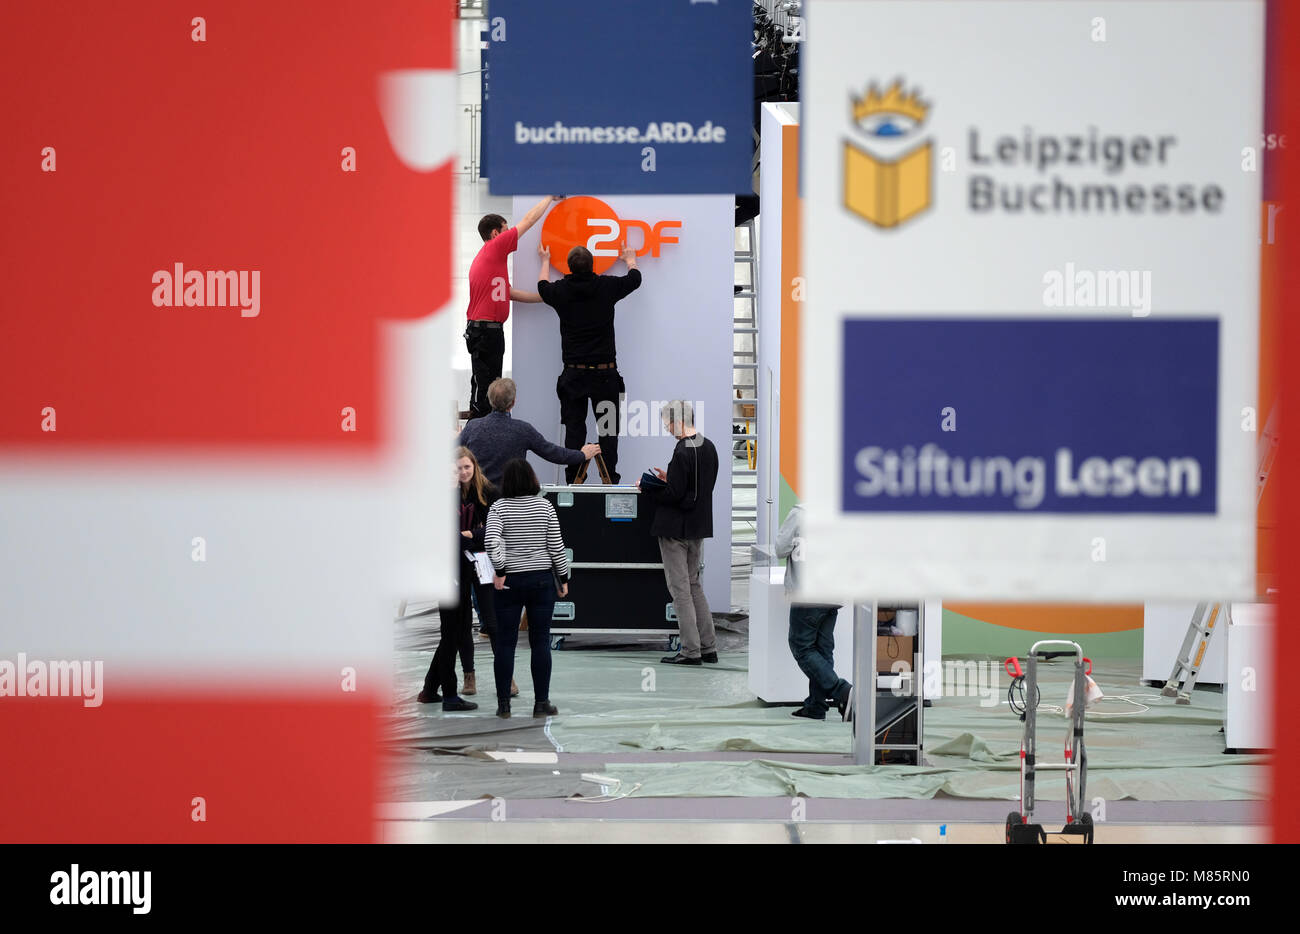 14 March 2018, Germany, Leipzig: Staff members decorate a fair stand of German public broadcaster and television station 'Zweites Deutsches Fernsehen (ZDF)' at the Leipzig Book Fair. Around 2,600 exhibitors are going to present their novelities from the world of literature at the fair which runs from 15 March to 18 March 2018. Photo: Sebastian Willnow/dpa-Zentralbild/dpa Stock Photo